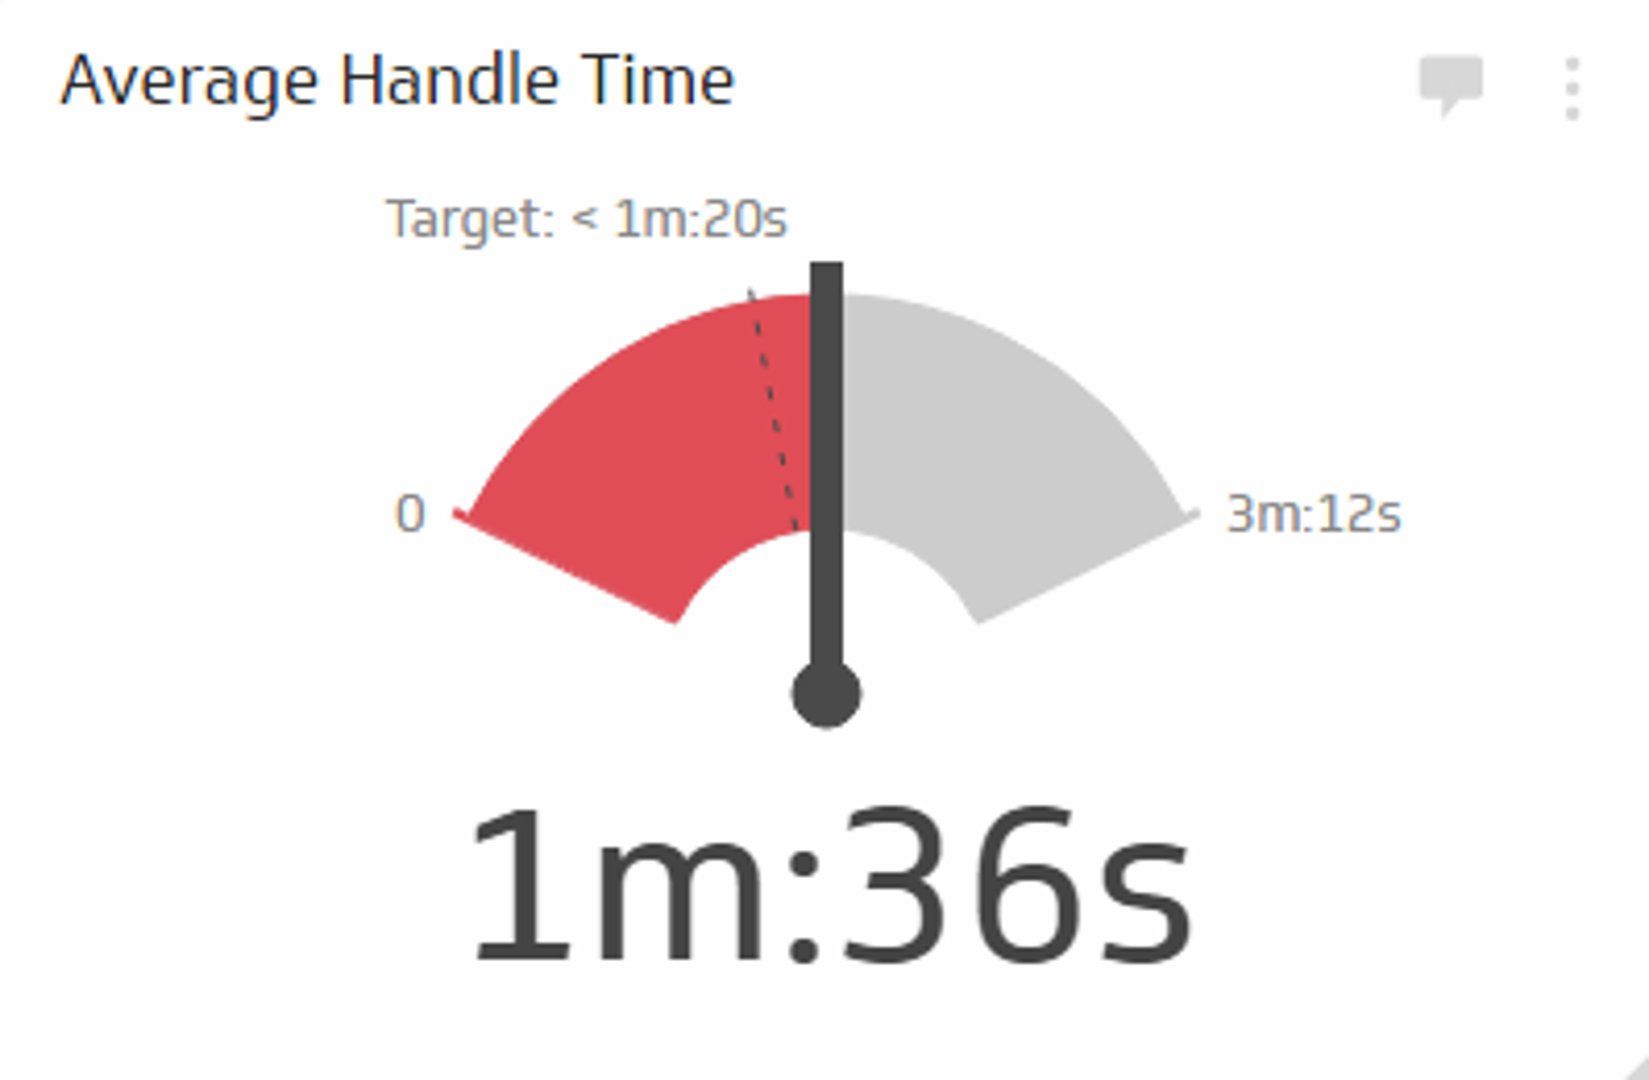 Related KPI Examples - Average Handle Time Metric